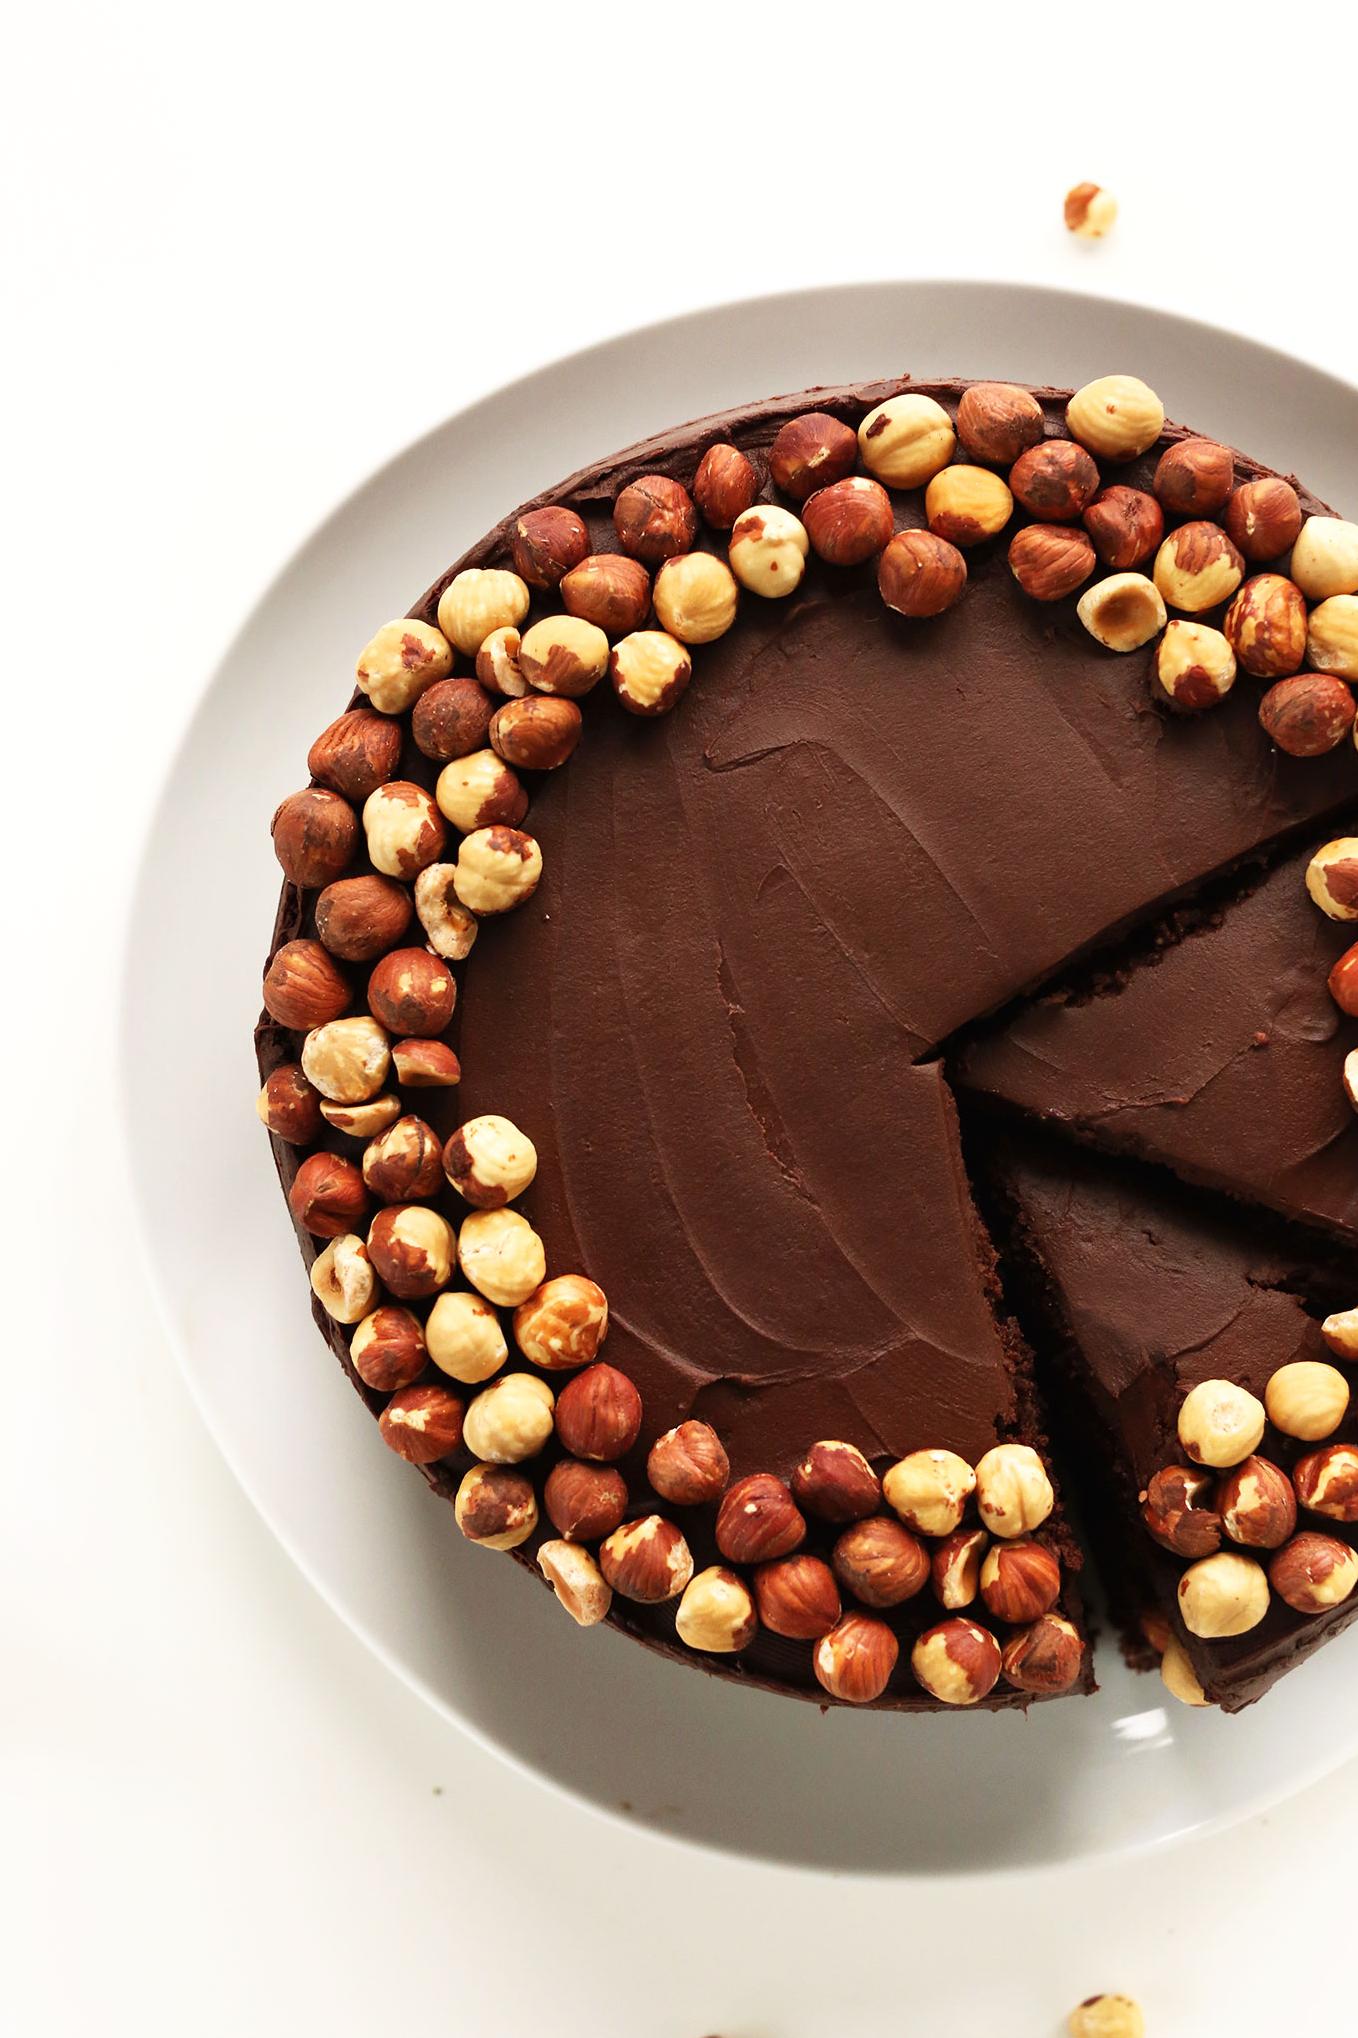  Chocolate lovers, rejoice! This cake is everything you dream of and more